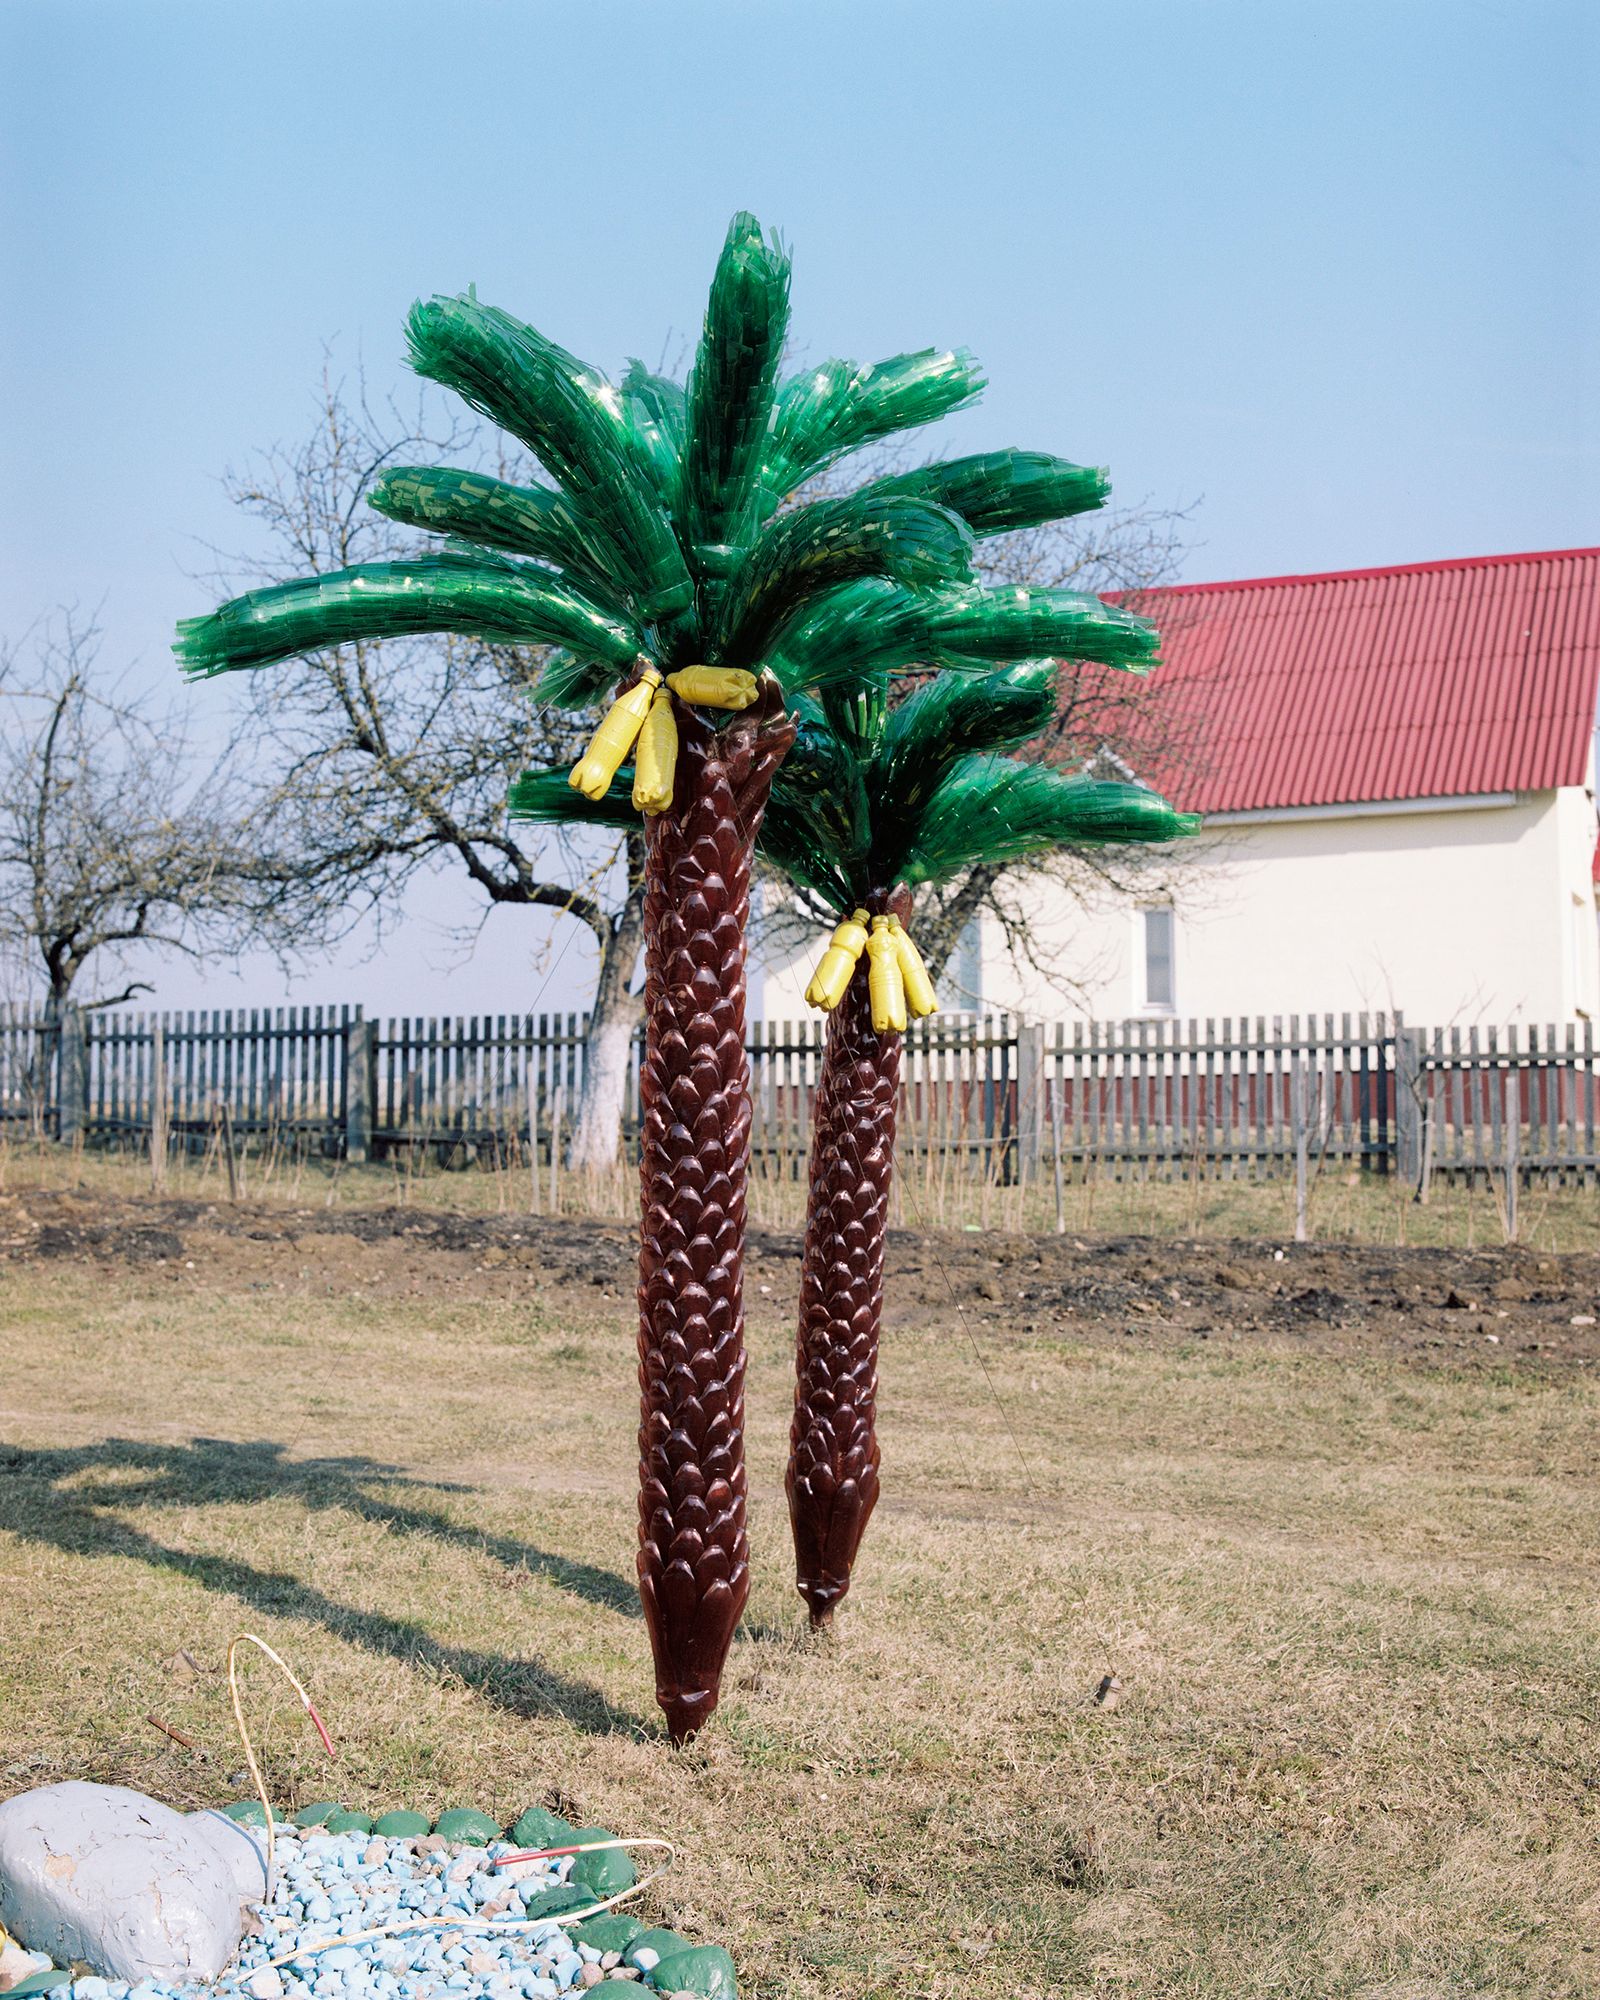 © Siarhiej Leskiec - Image from the AGRO photography project